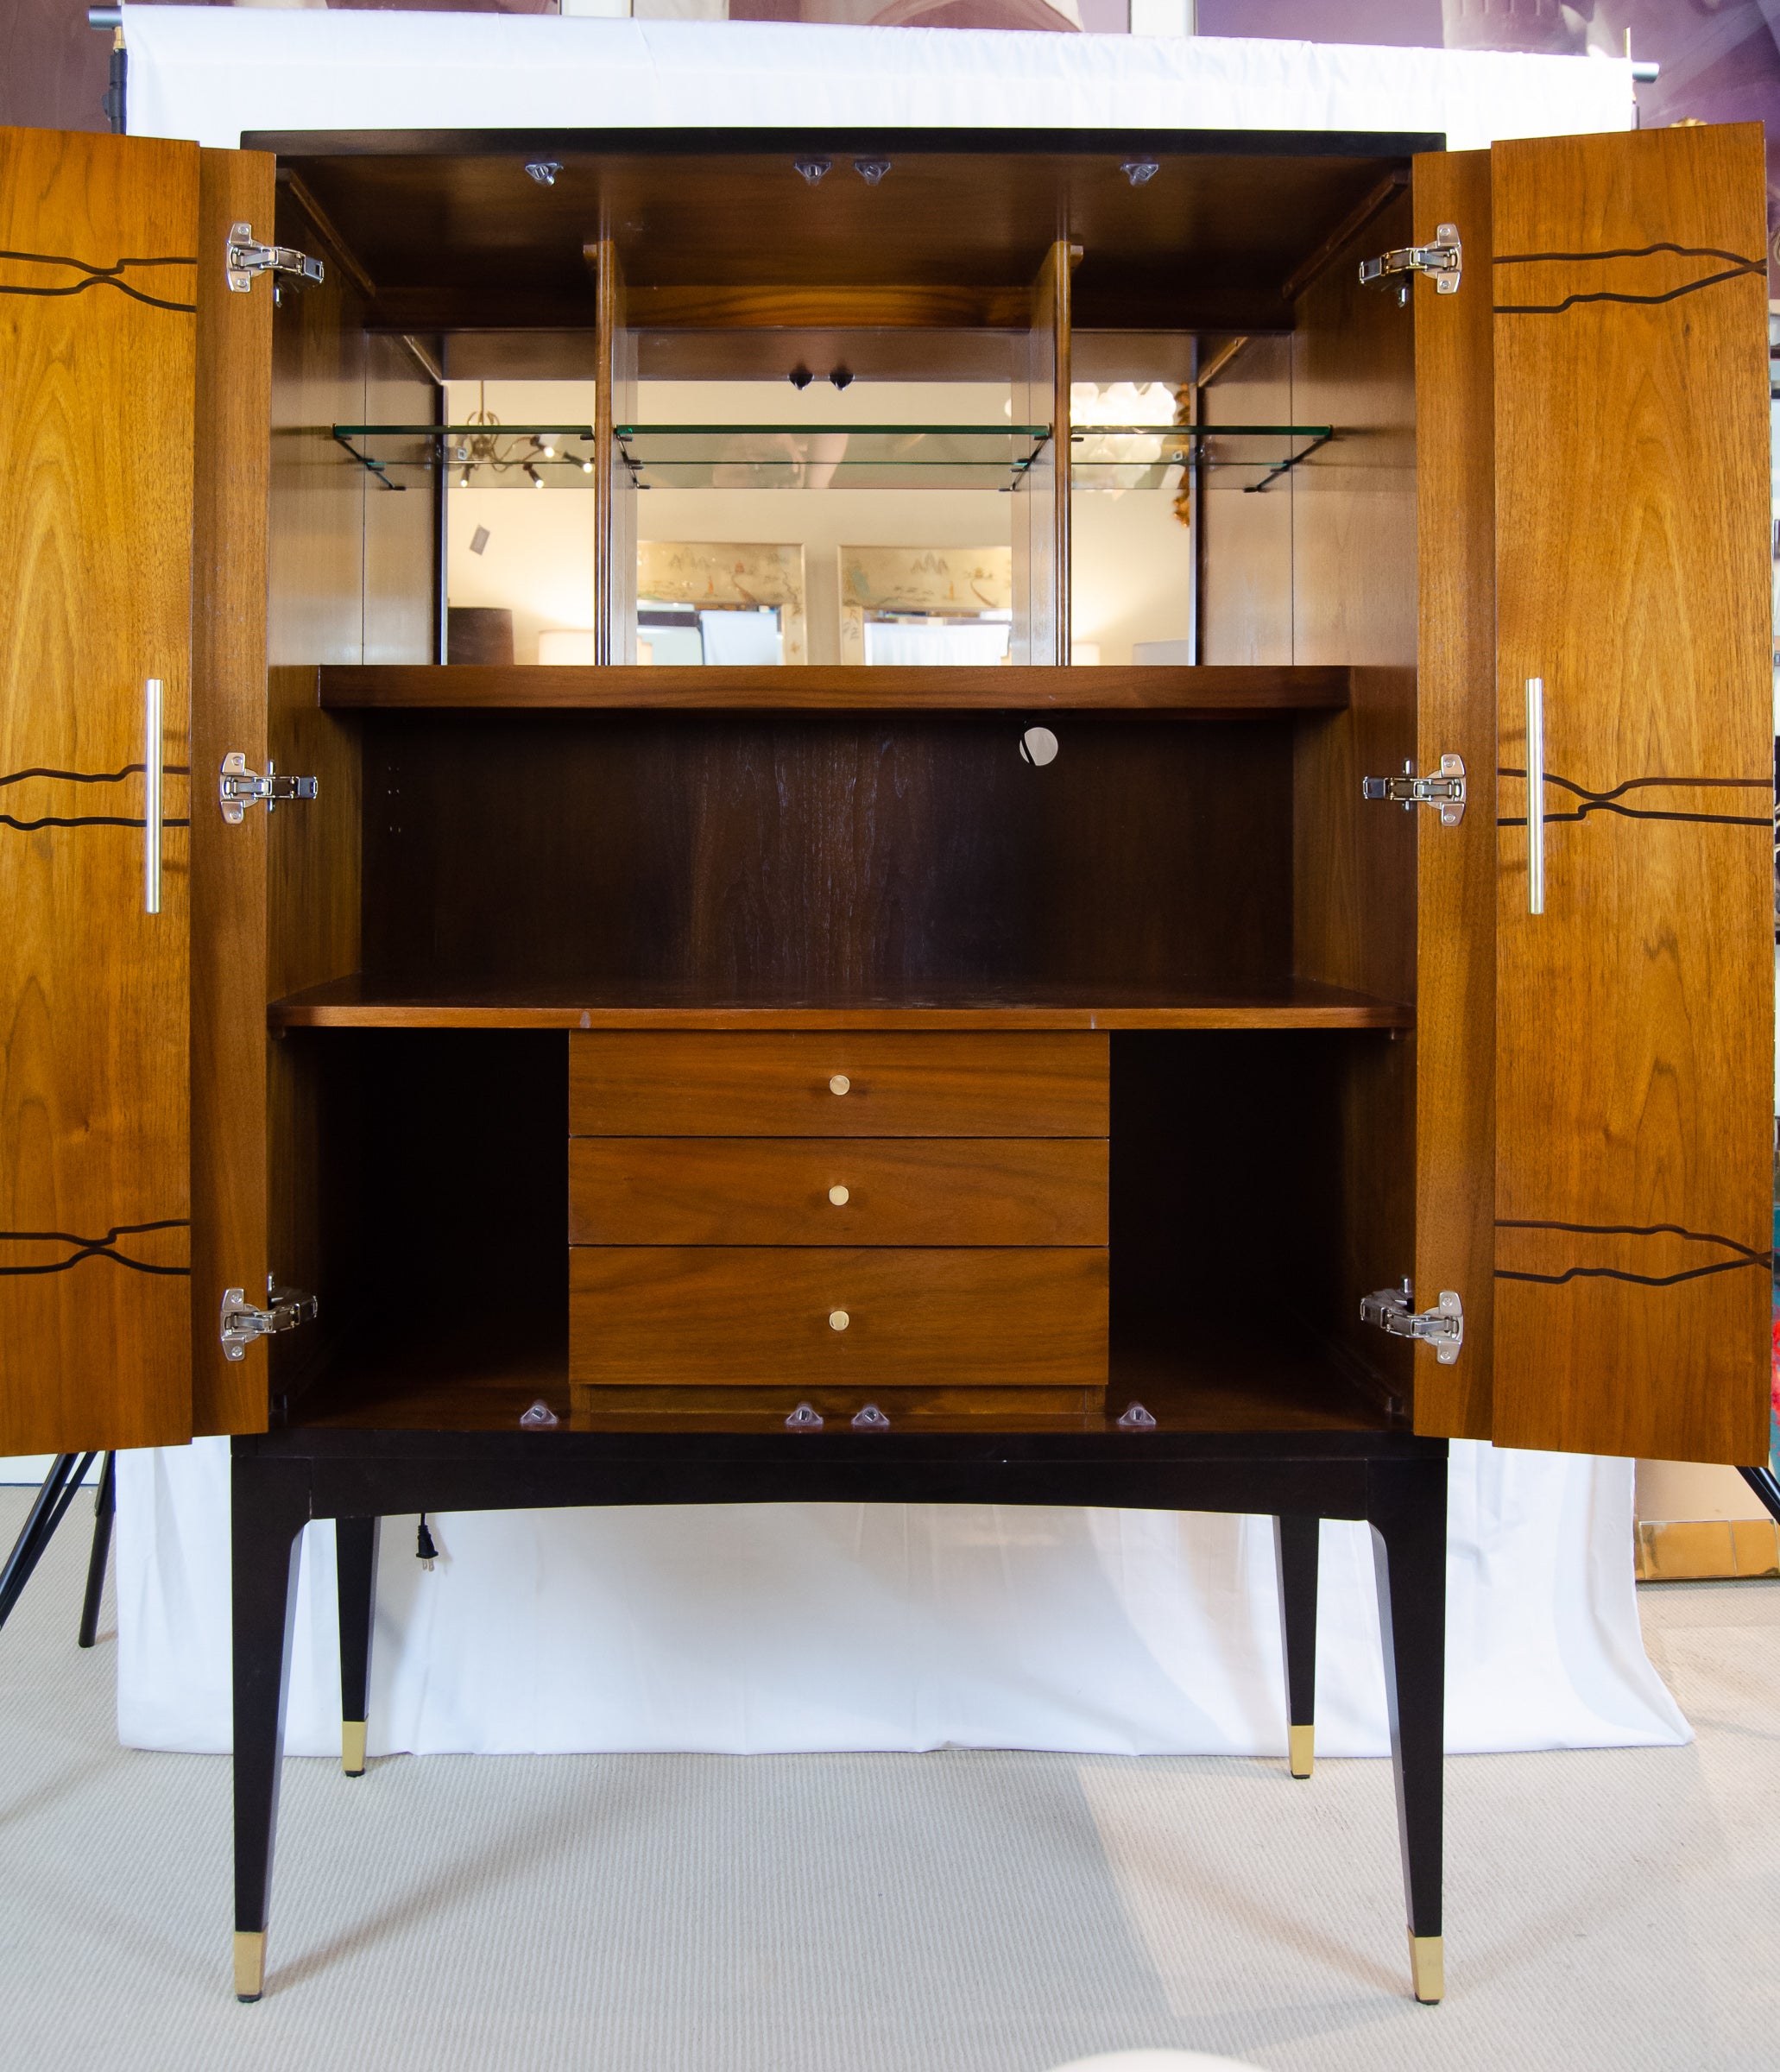 Contemporary Art Deco Influenced Inlaid Wood & Lacquer Bar Cabinet by Brownstone Furniture